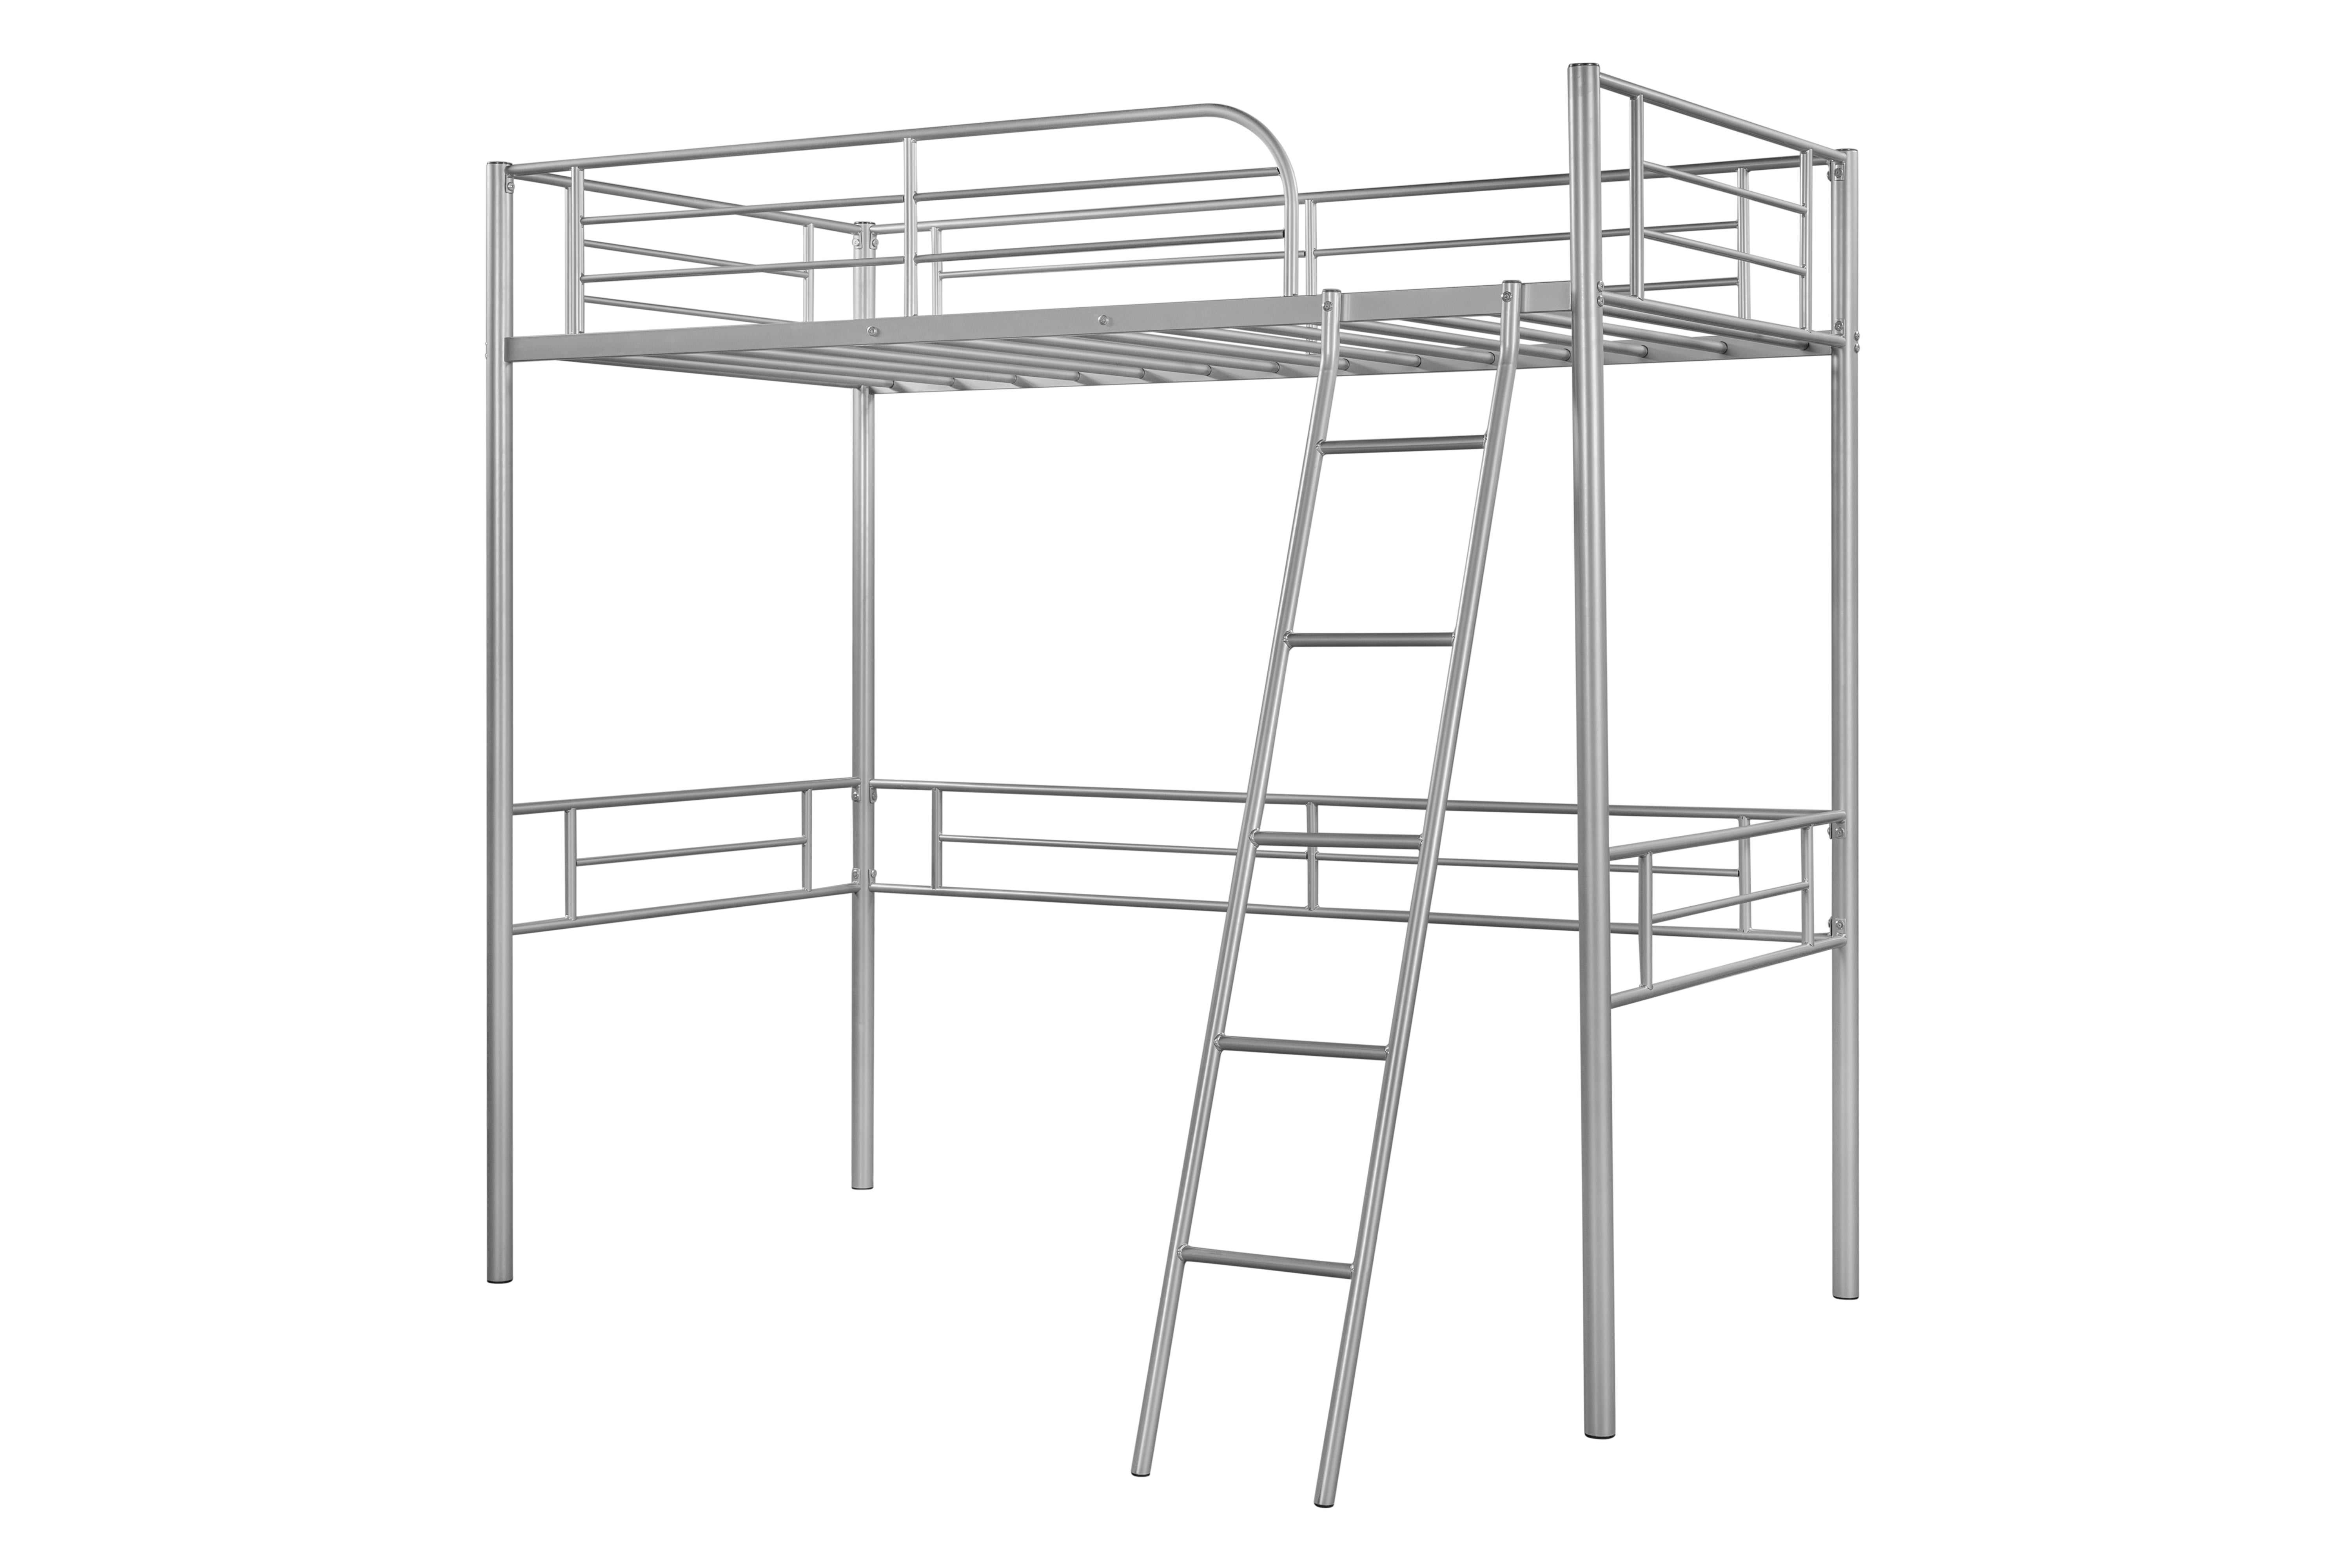 Labymos Loft Bed Com, Yourzone Metal Loft Twin Bed Directions